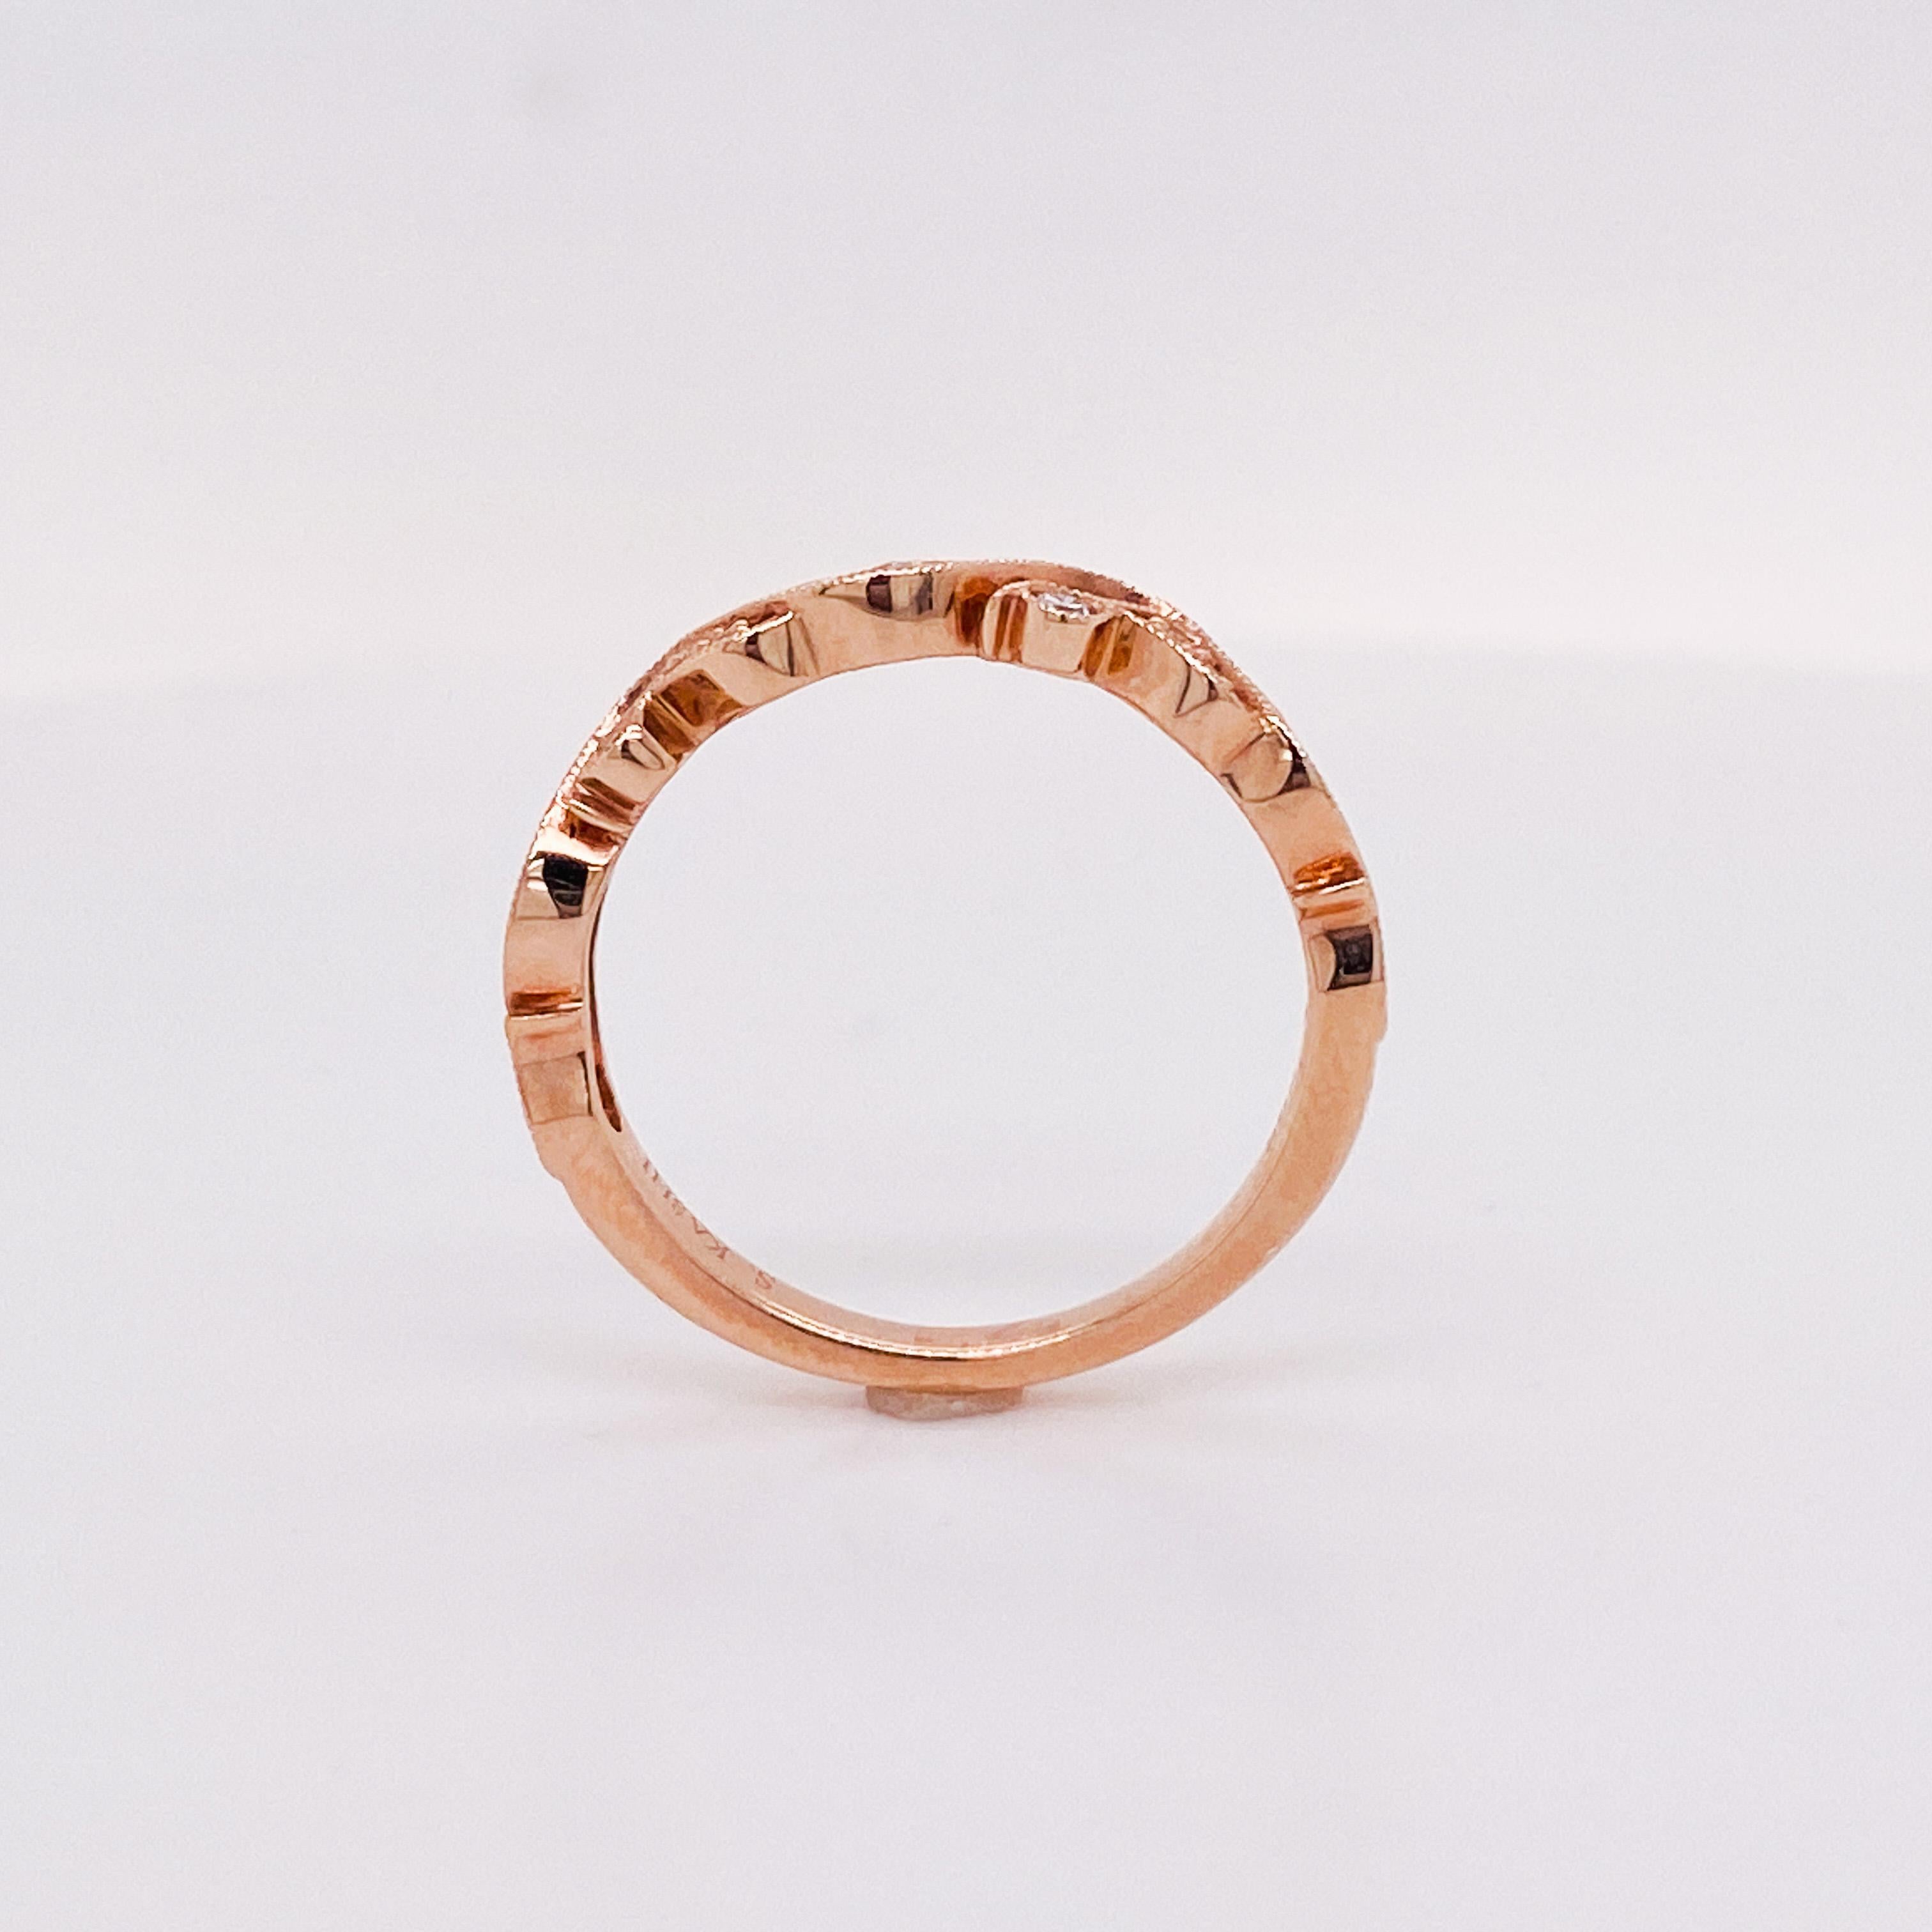 For Sale:  Leaf and Vine Diamond Ring .16 Carats in Rose Gold Stacking or Wedding Band LV 5